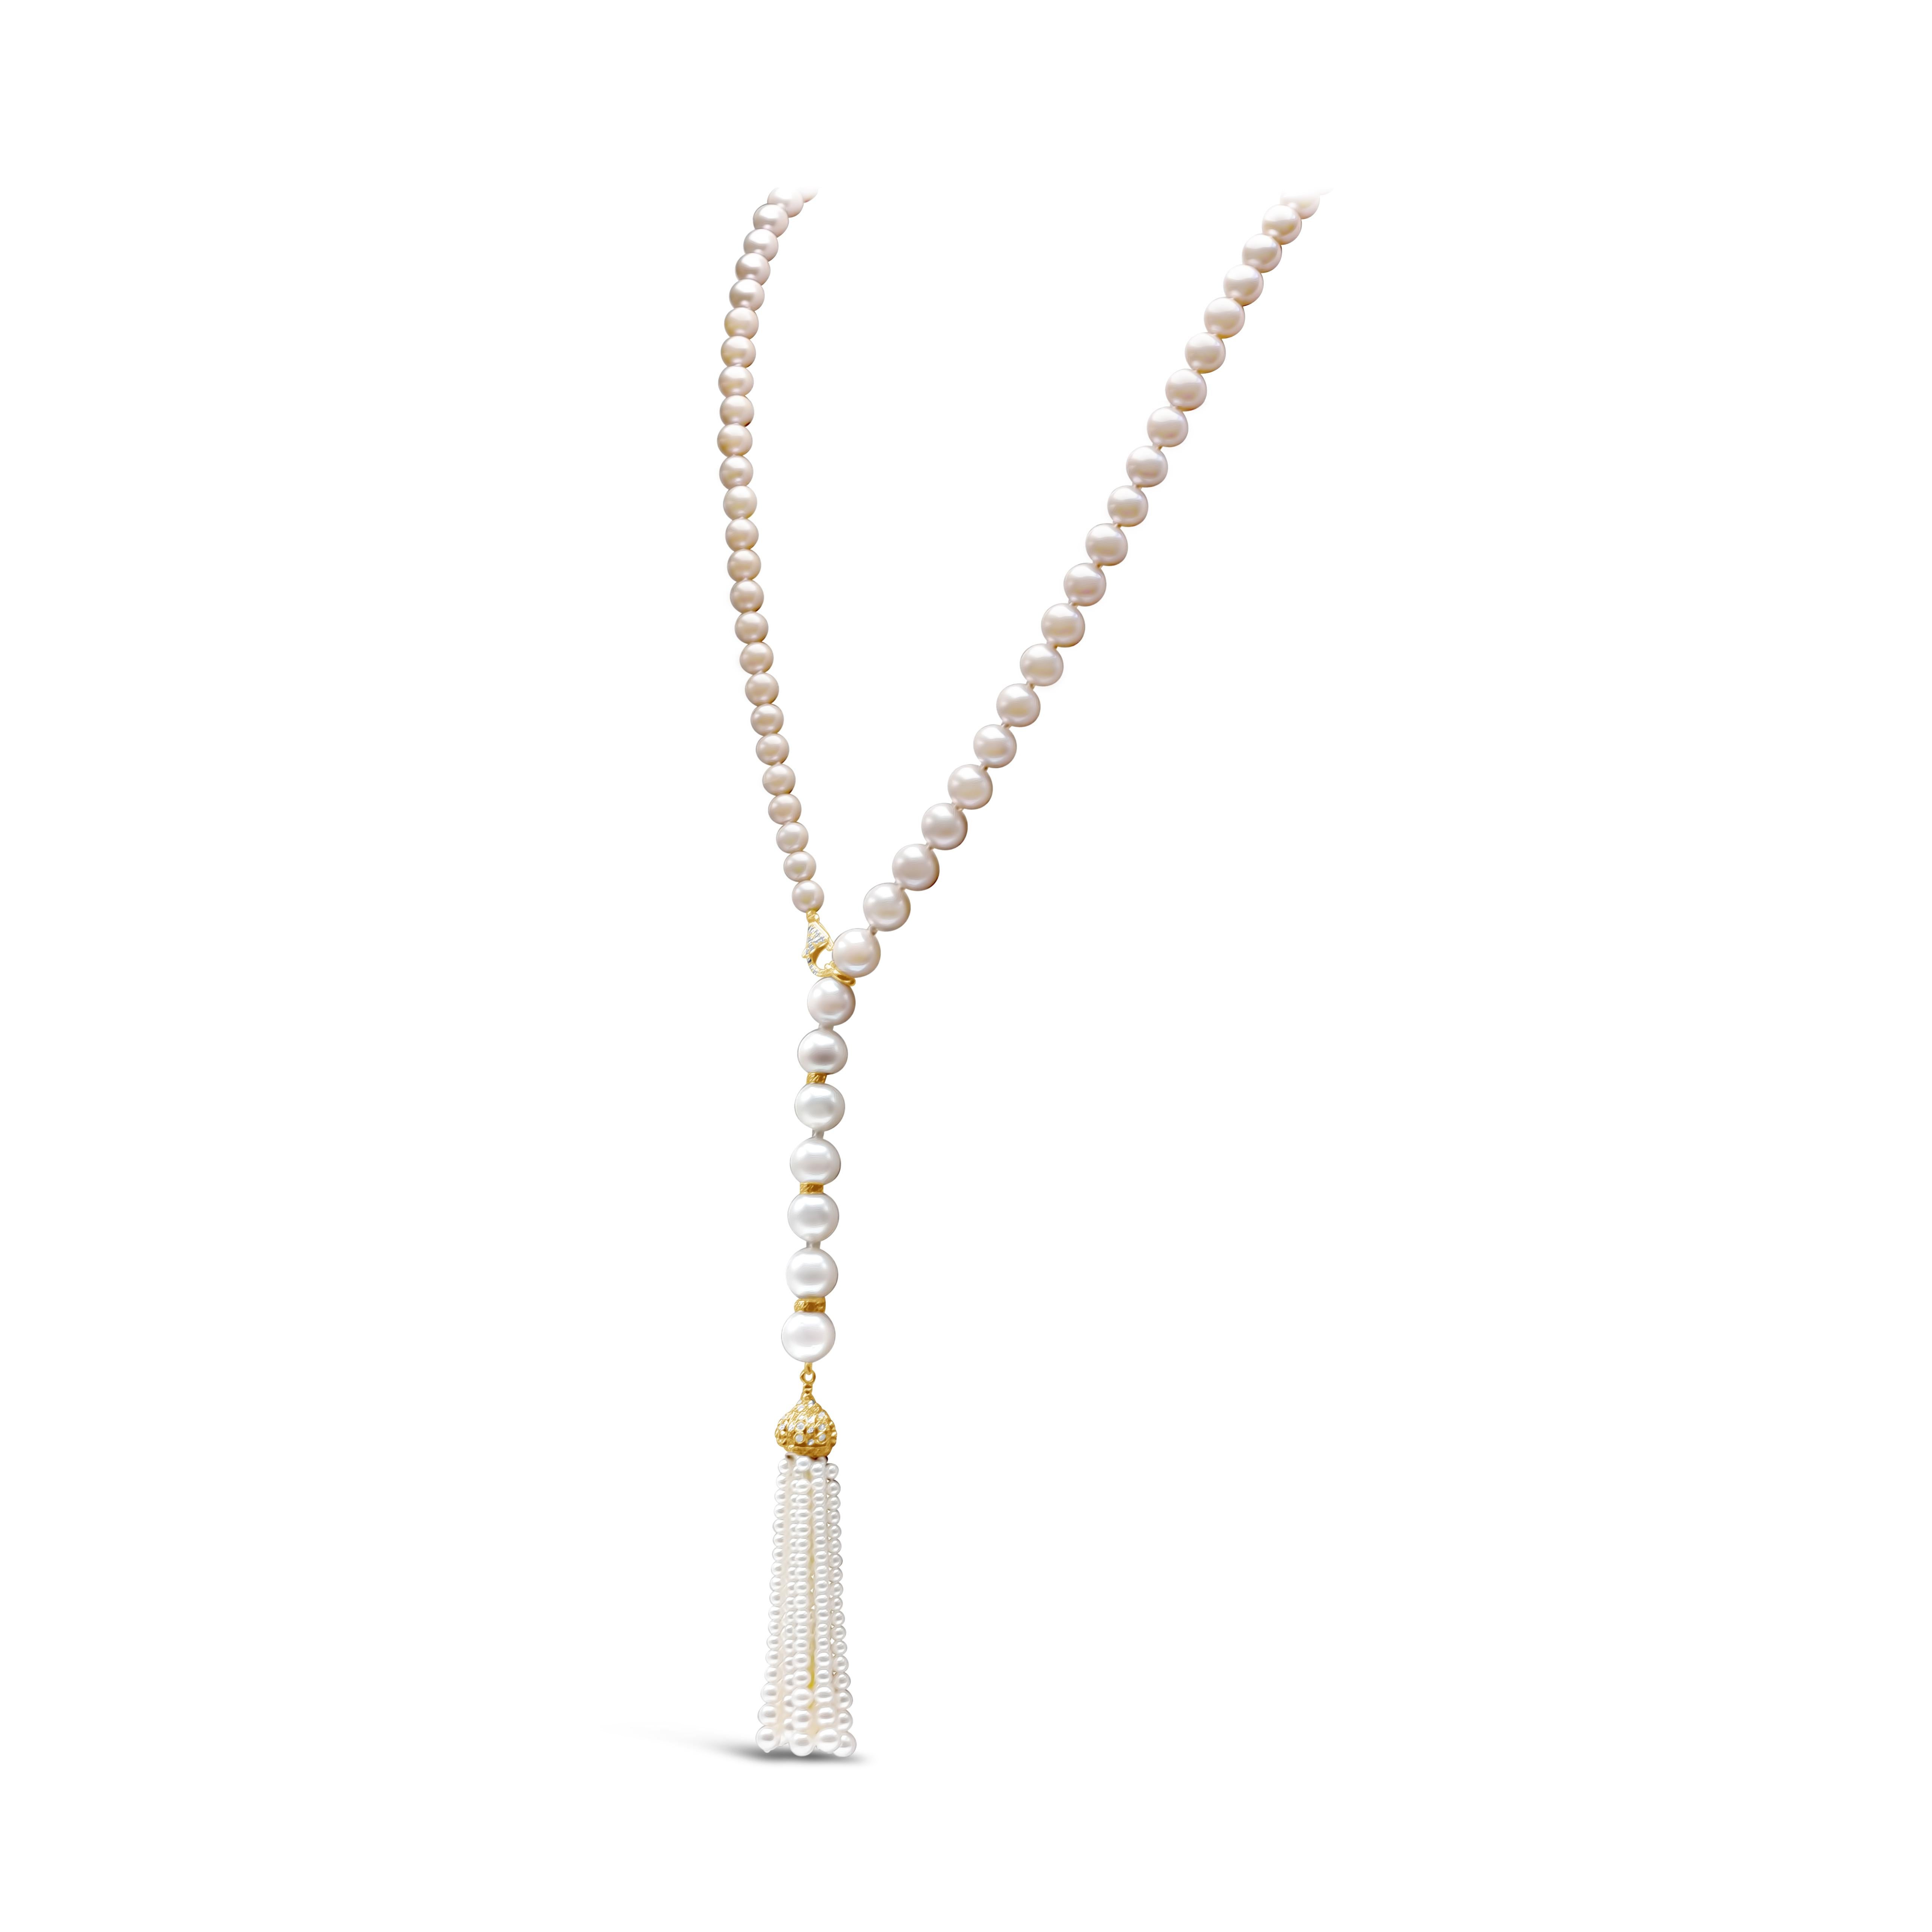 A beautiful tassel necklace featuring 7.8-13 mm pink and white south sea pearls. It has 83 pieces of south sea pearls with a tassel drop that is 7.5 inches long and designed in a classic opera length style. Length of this necklace can be